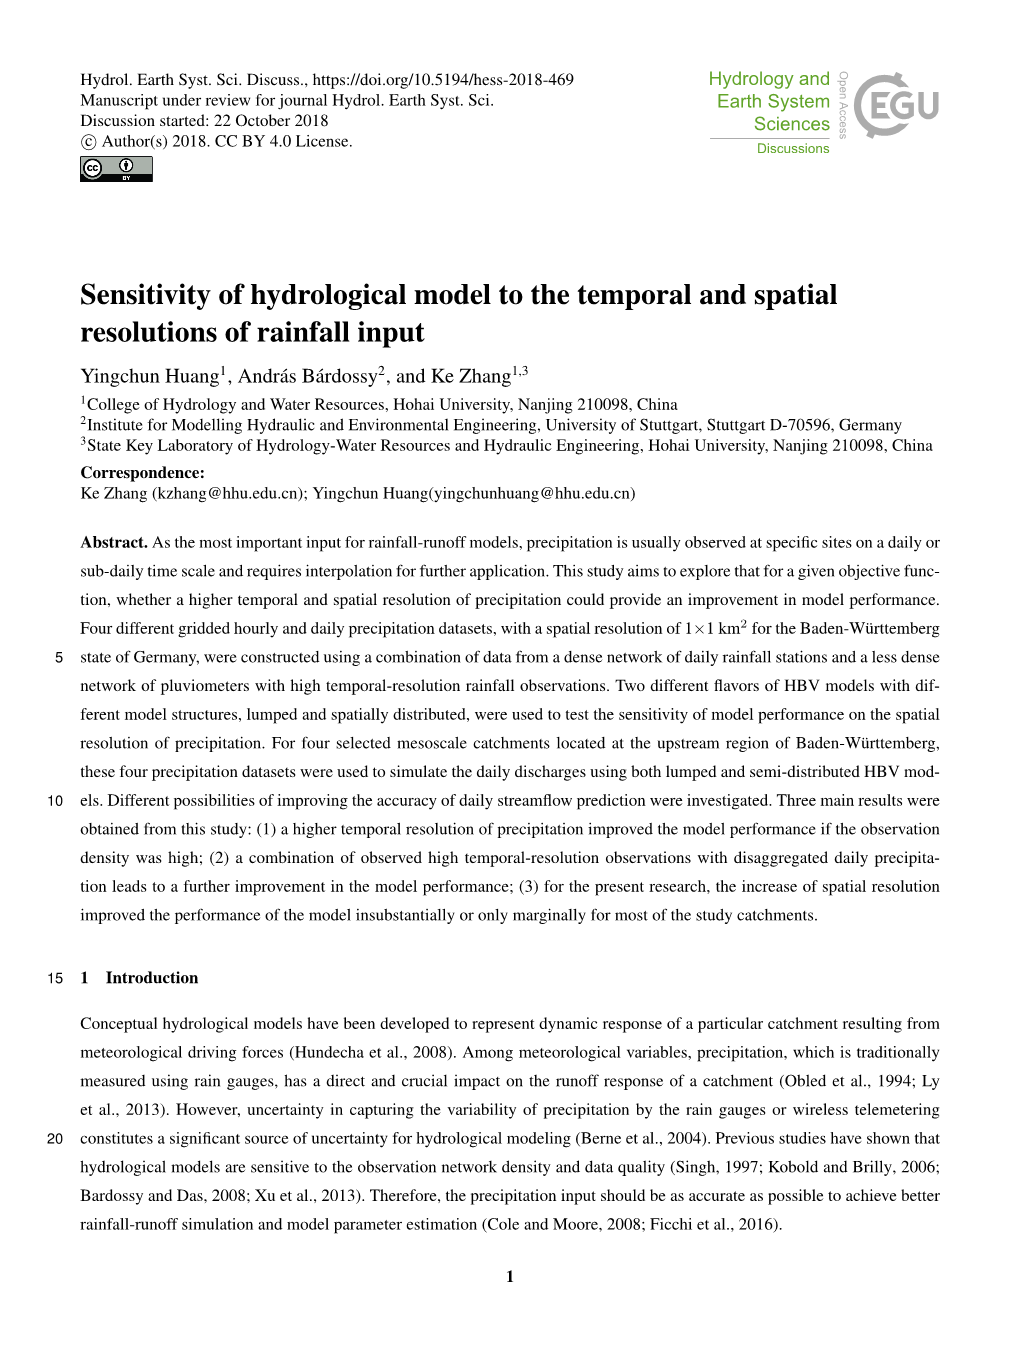 Sensitivity of Hydrological Model to the Temporal and Spatial Resolutions Of